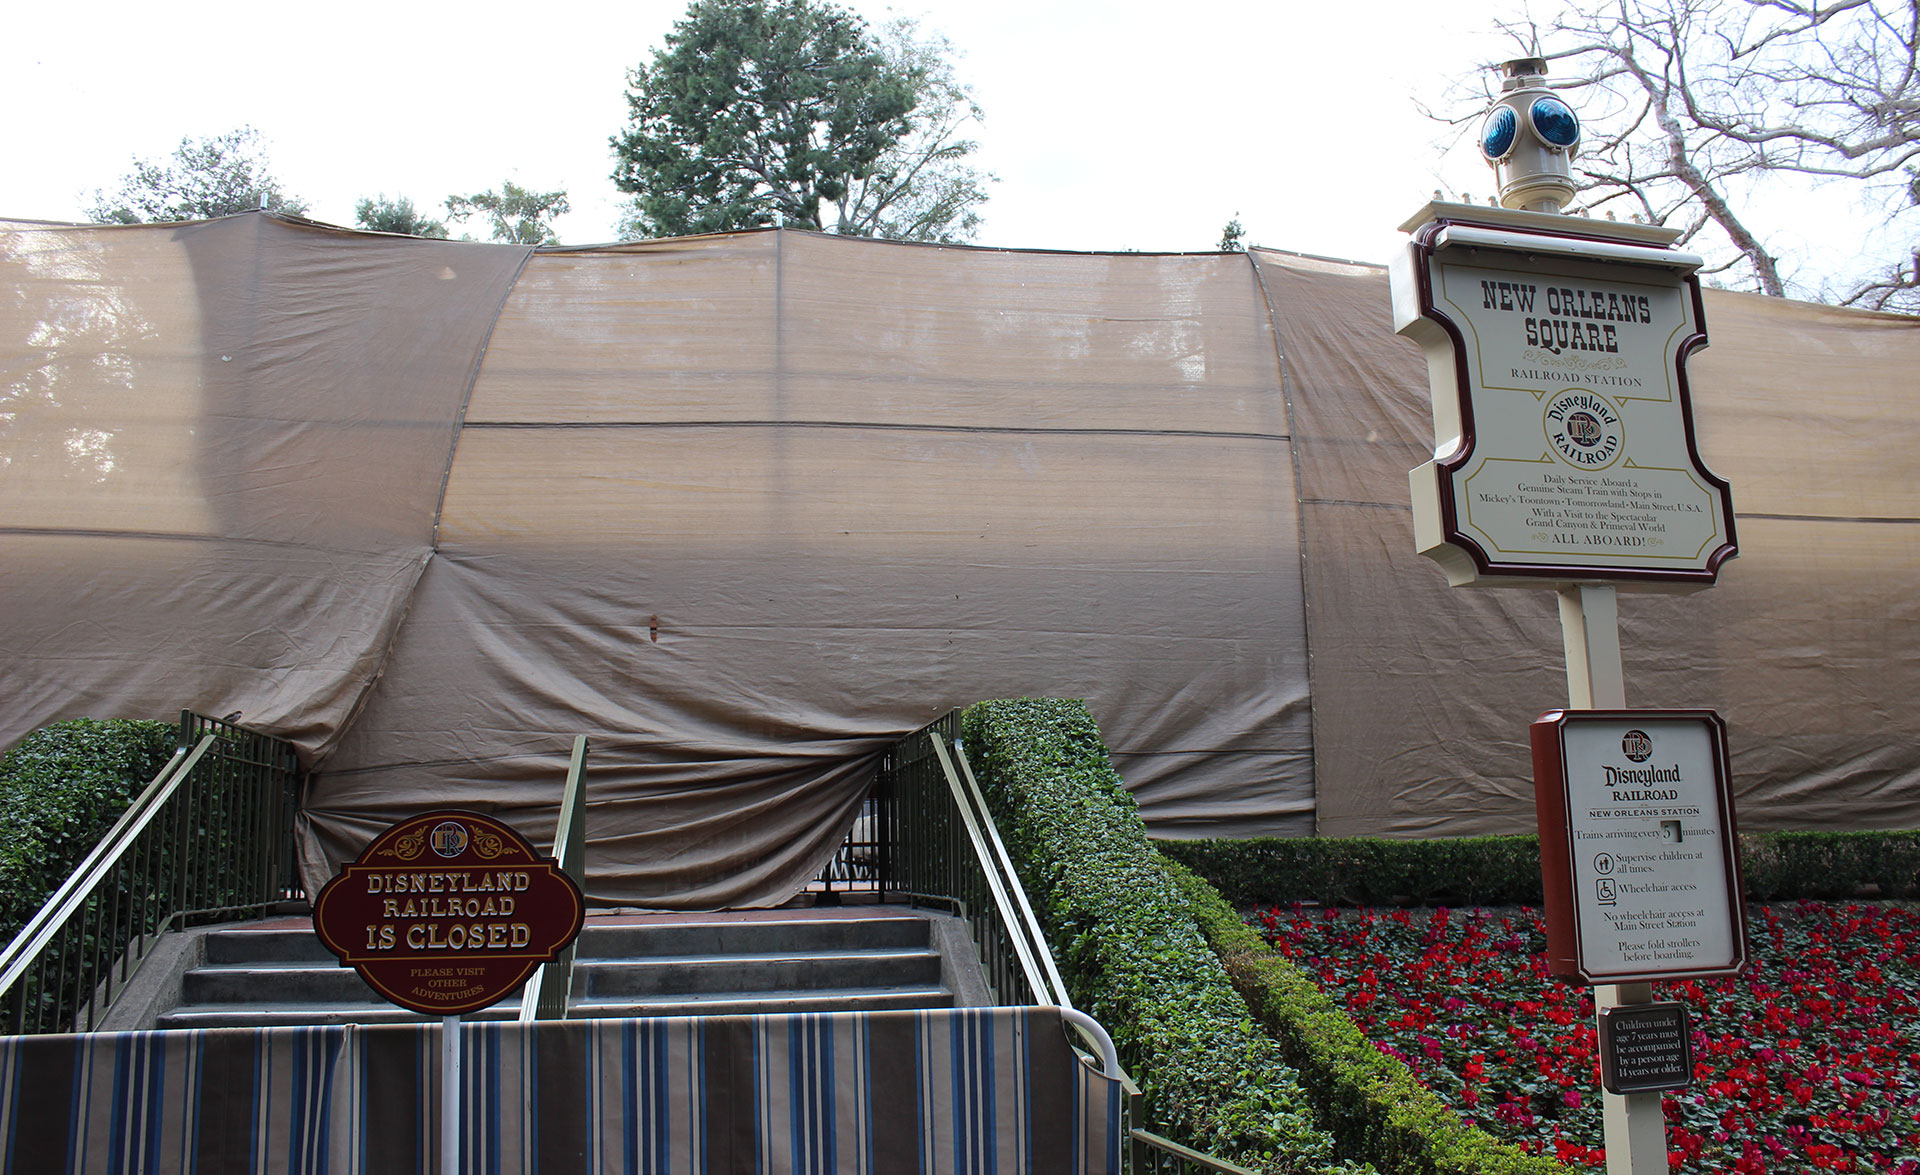 The Disneyland Railroad that normally transports guests around the park is closed for an update. 